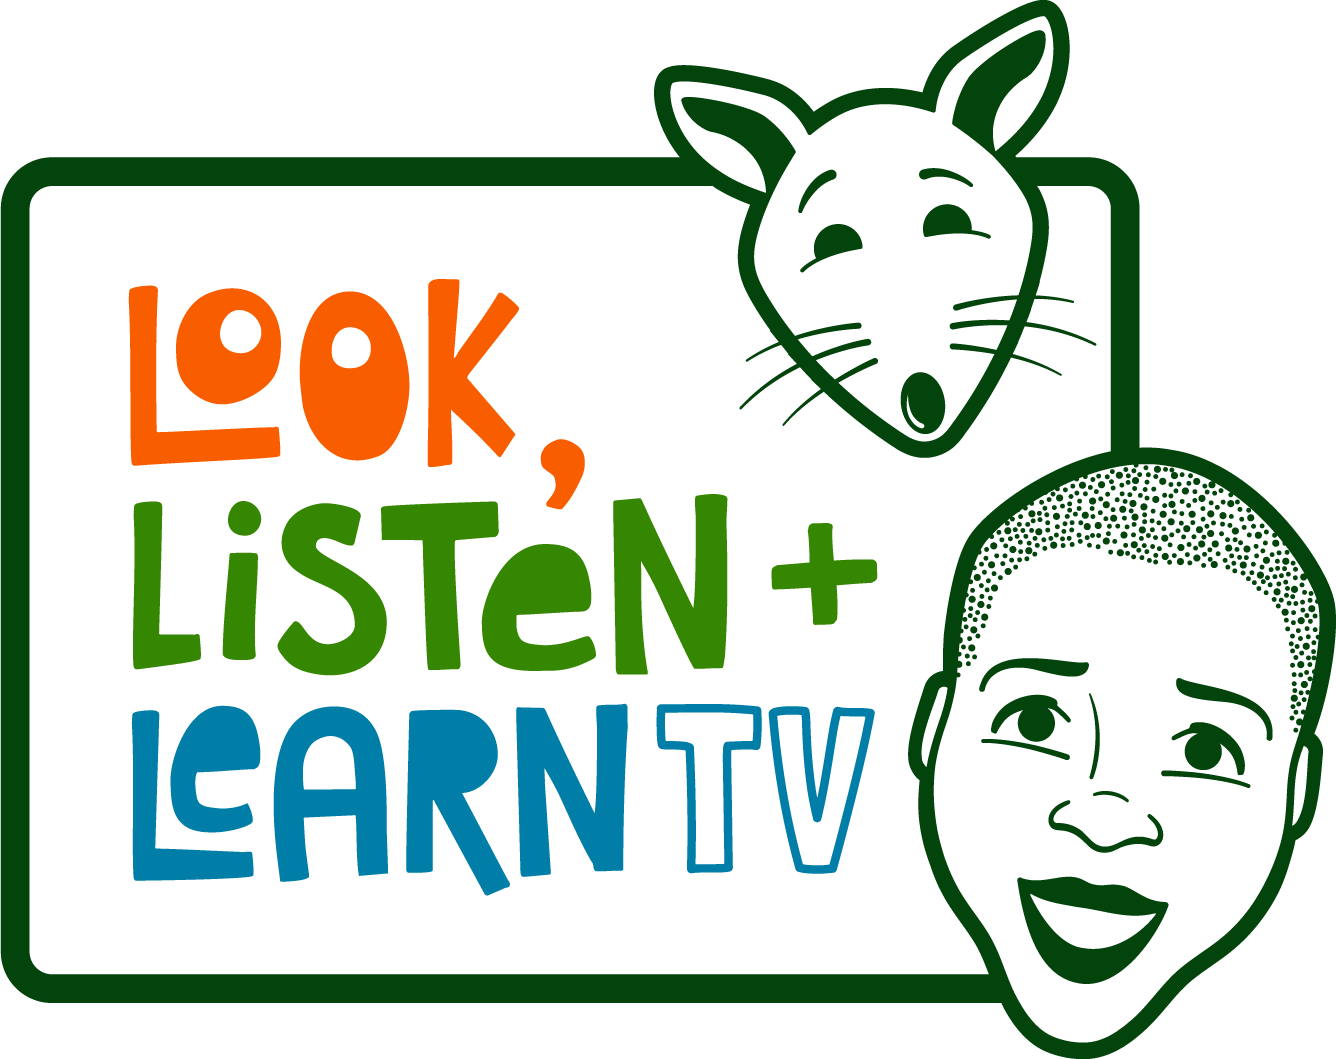 Look Listen and Learn TV